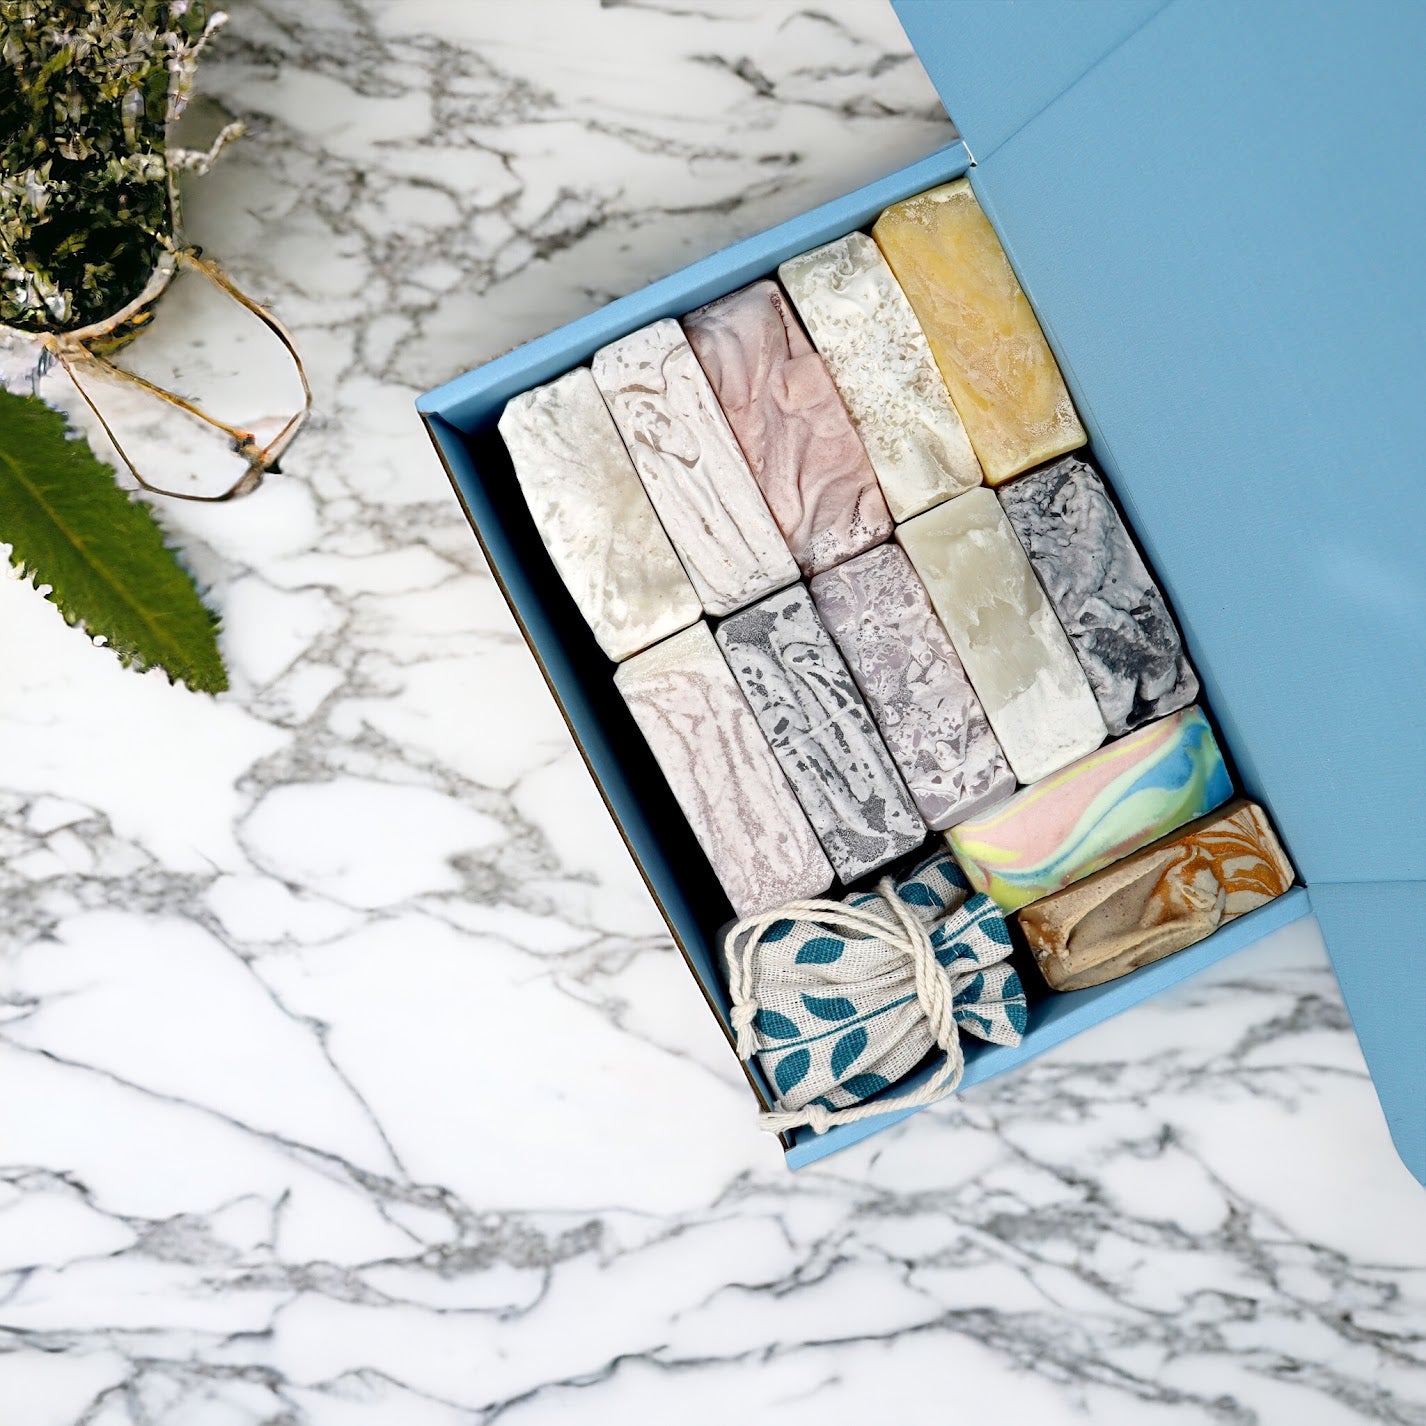 Top view of a variety of 12 soap bars inside a blue gift box, and a surprise item in a blue patterned bag with drawstring, displayed on a marble counter top with a plant nearby